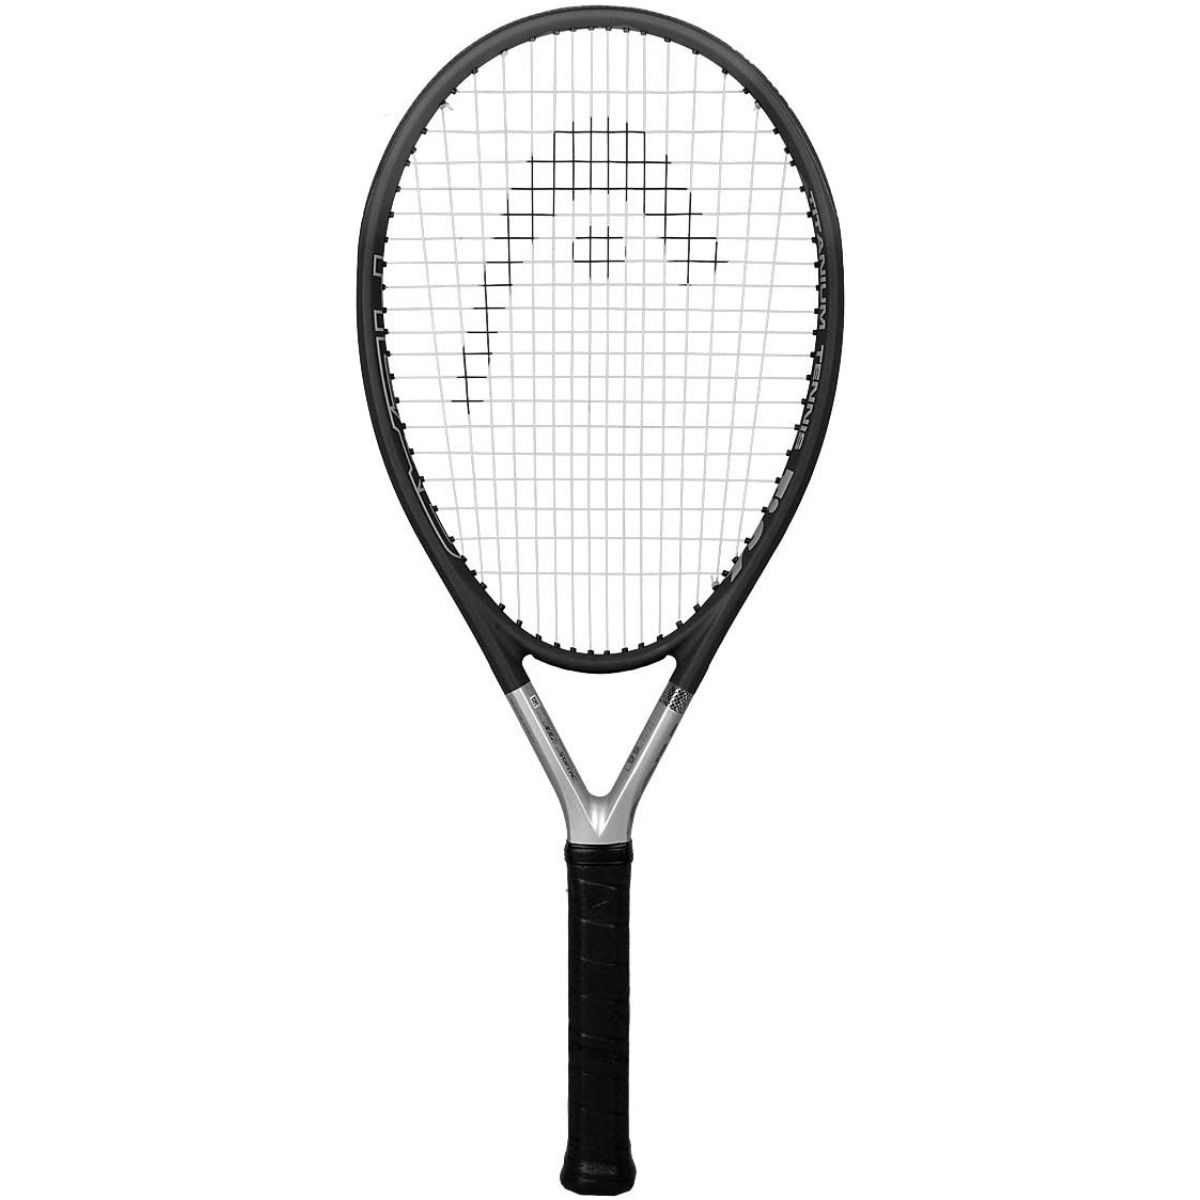 The Best Tennis Rackets for Beginners Options: Head Ti S6